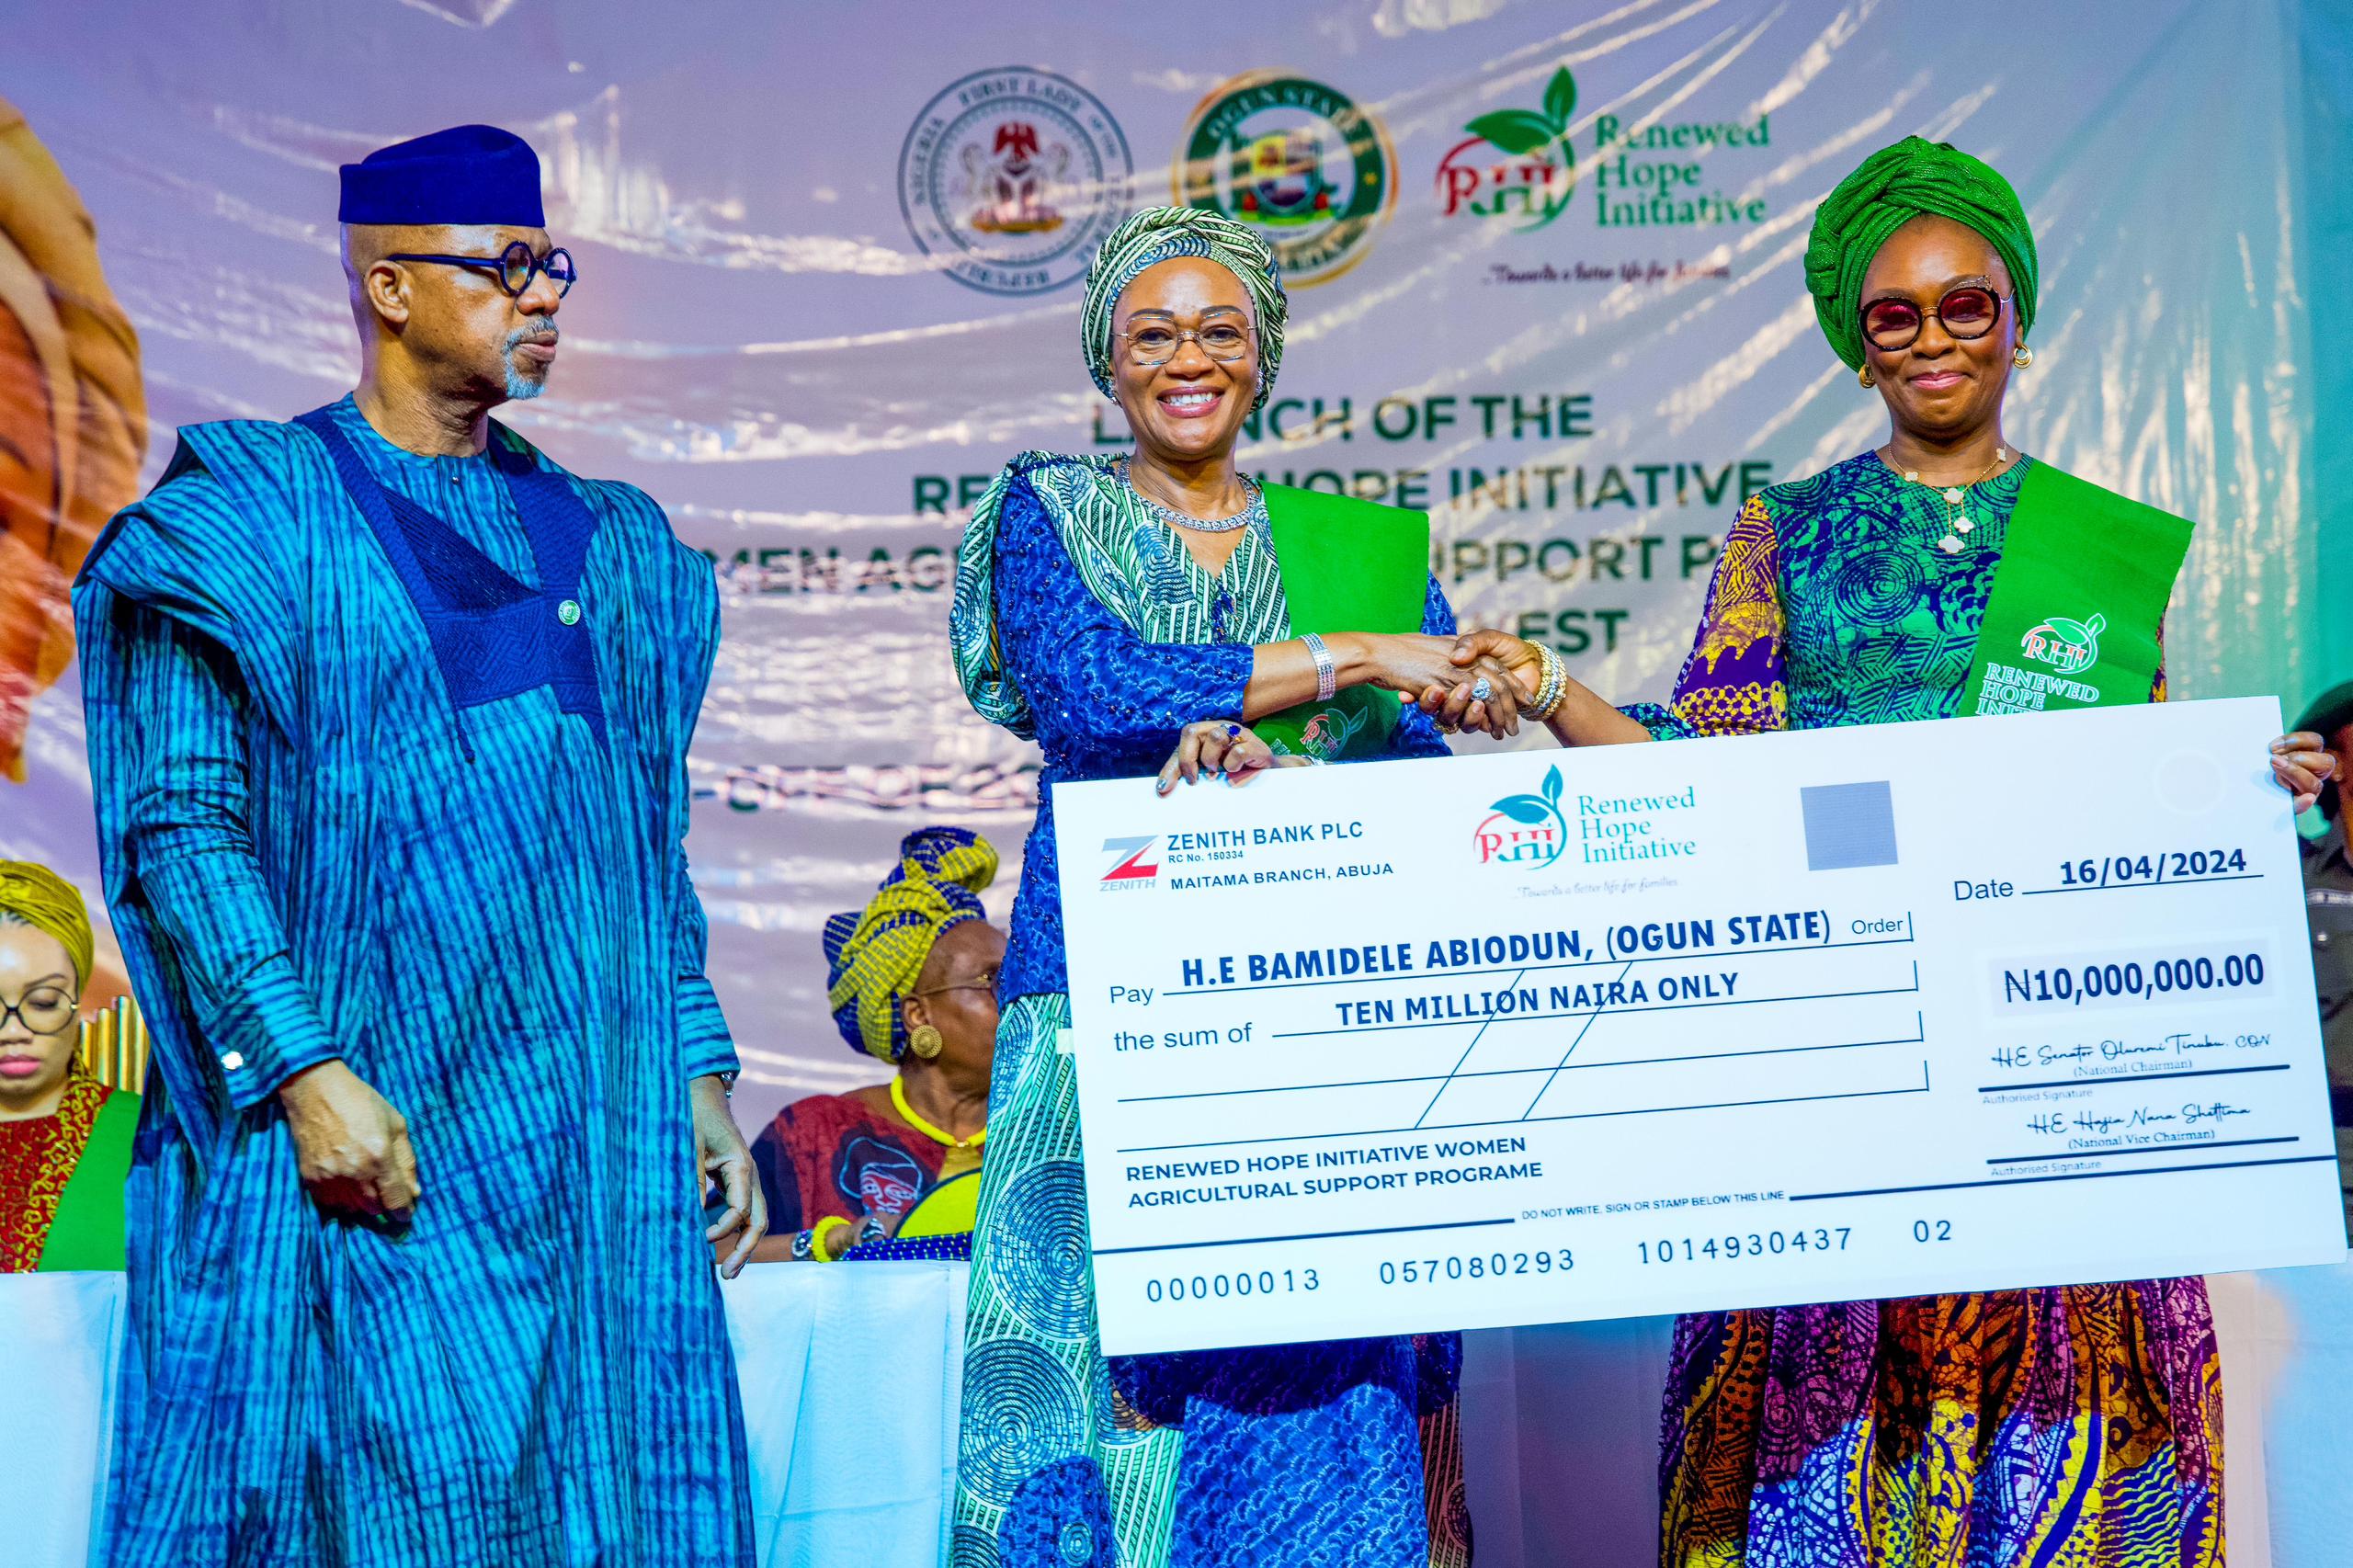 President’s wife launches Renewed Hope Initiative programme for South West women in Abeokuta